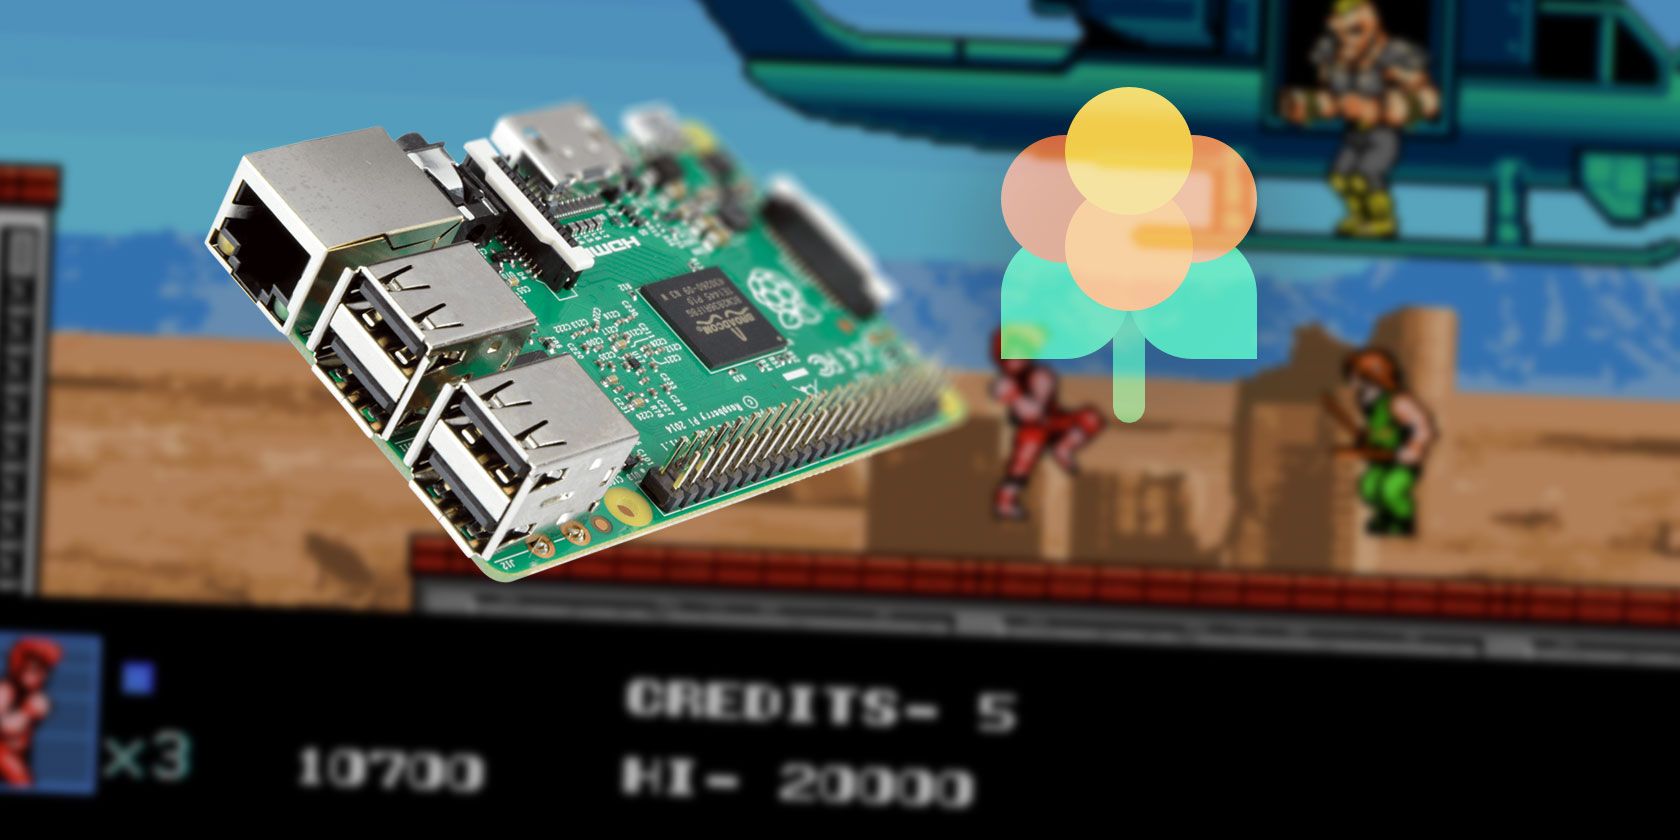 lakka raspberry pi 3 supported games